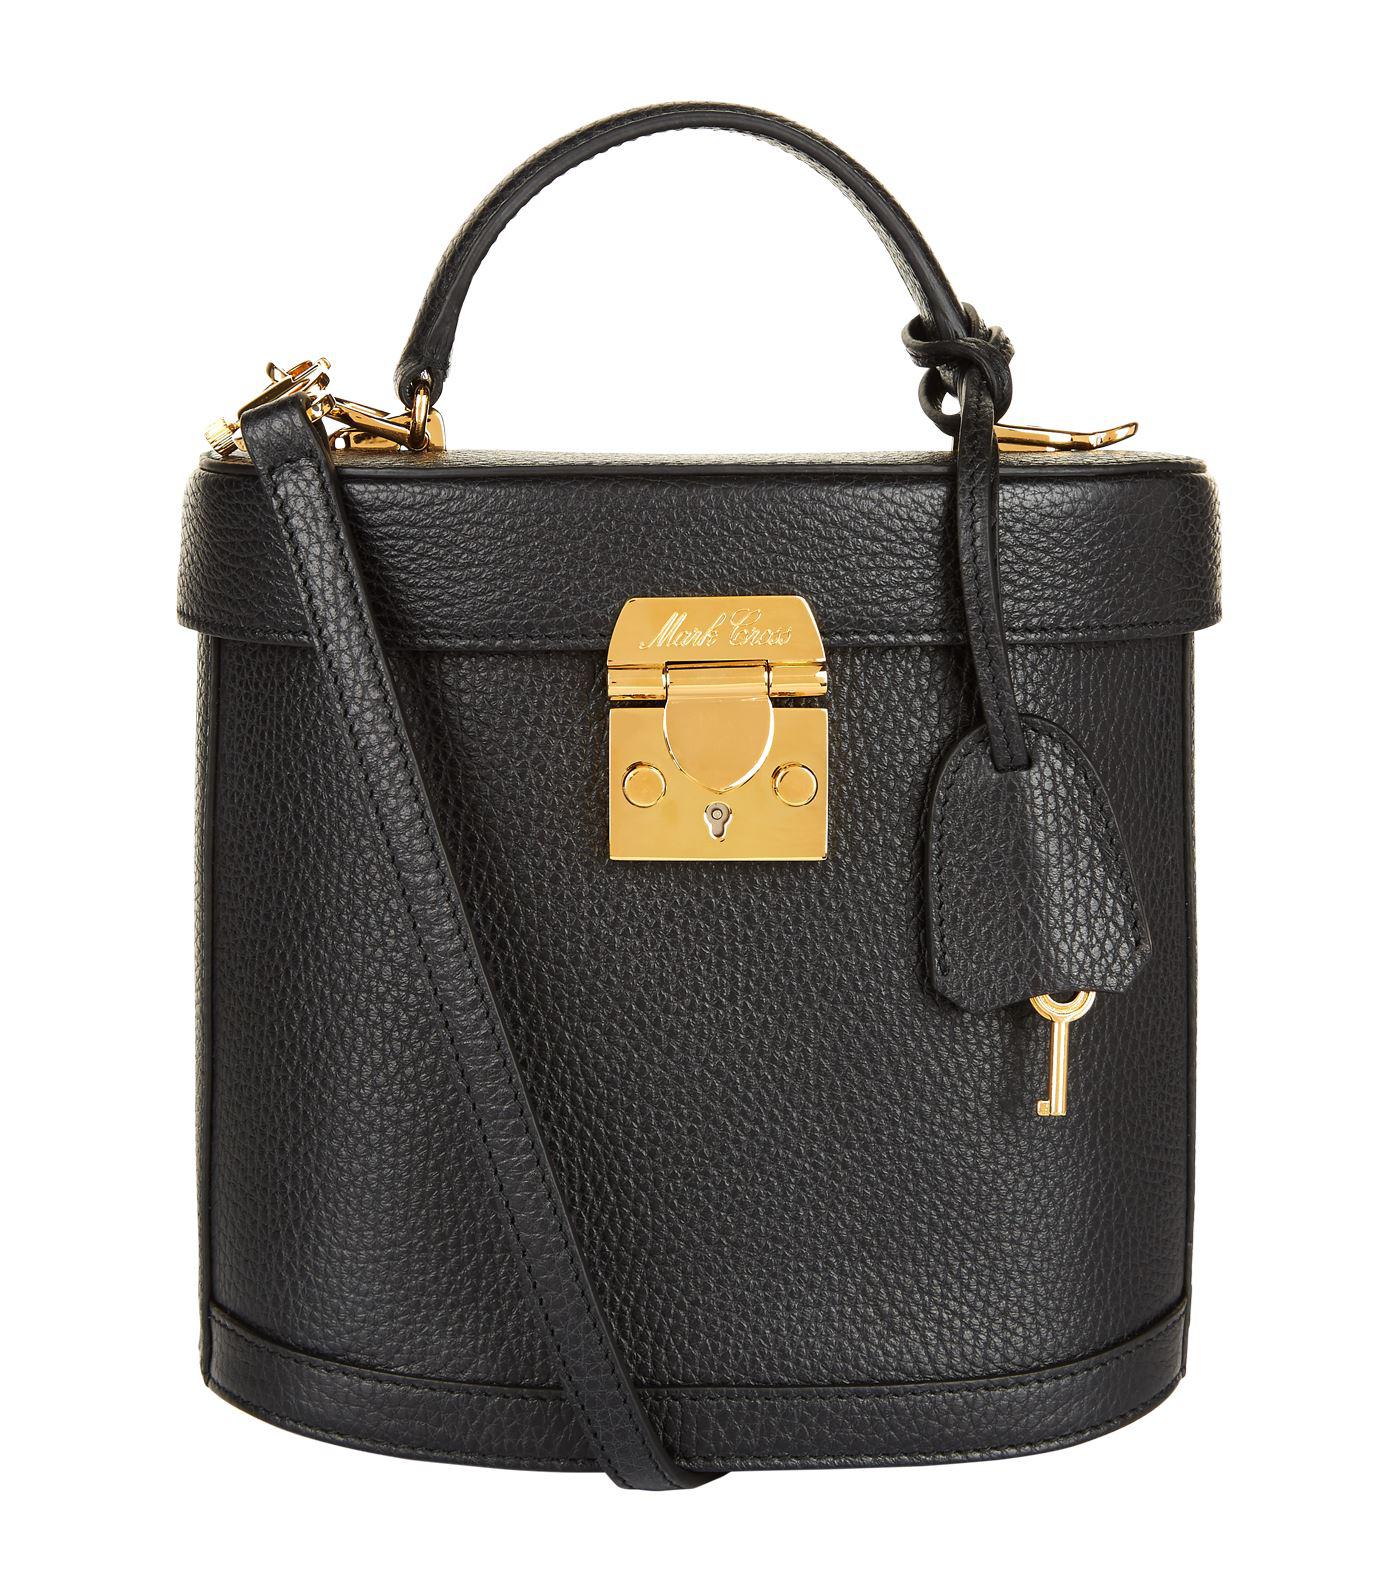 Mark Cross Benchley Grained Leather Shoulder Bag in Black - Lyst